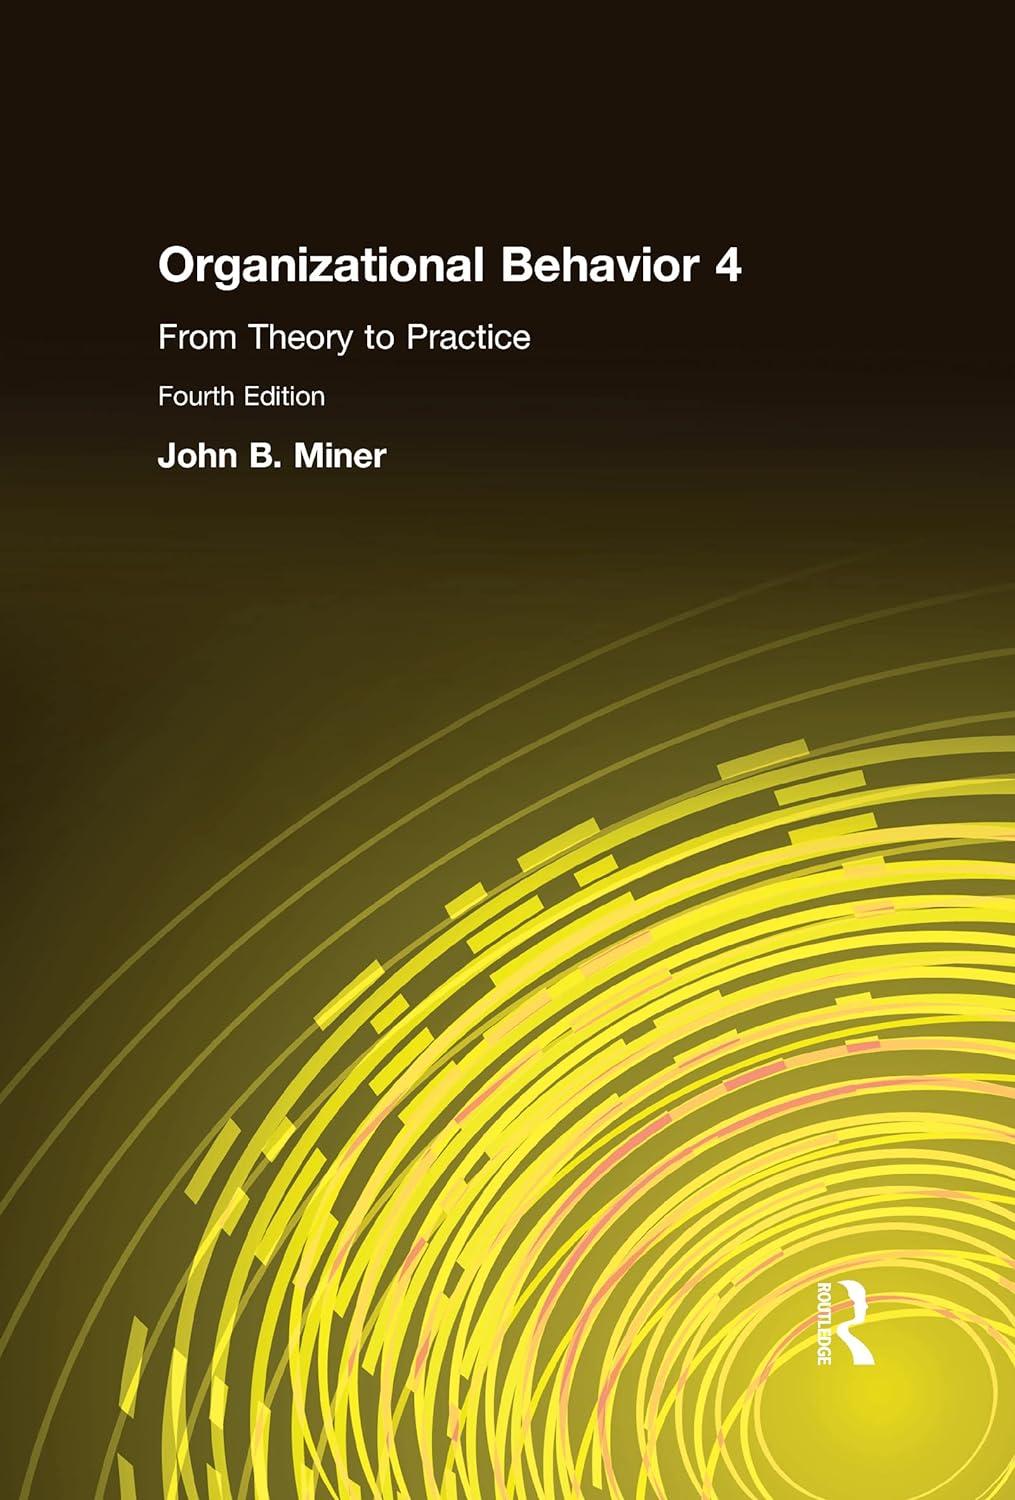 organizational behavior 4 from theory to practice 4th edition john b. miner 0765615305, 978-0765615305